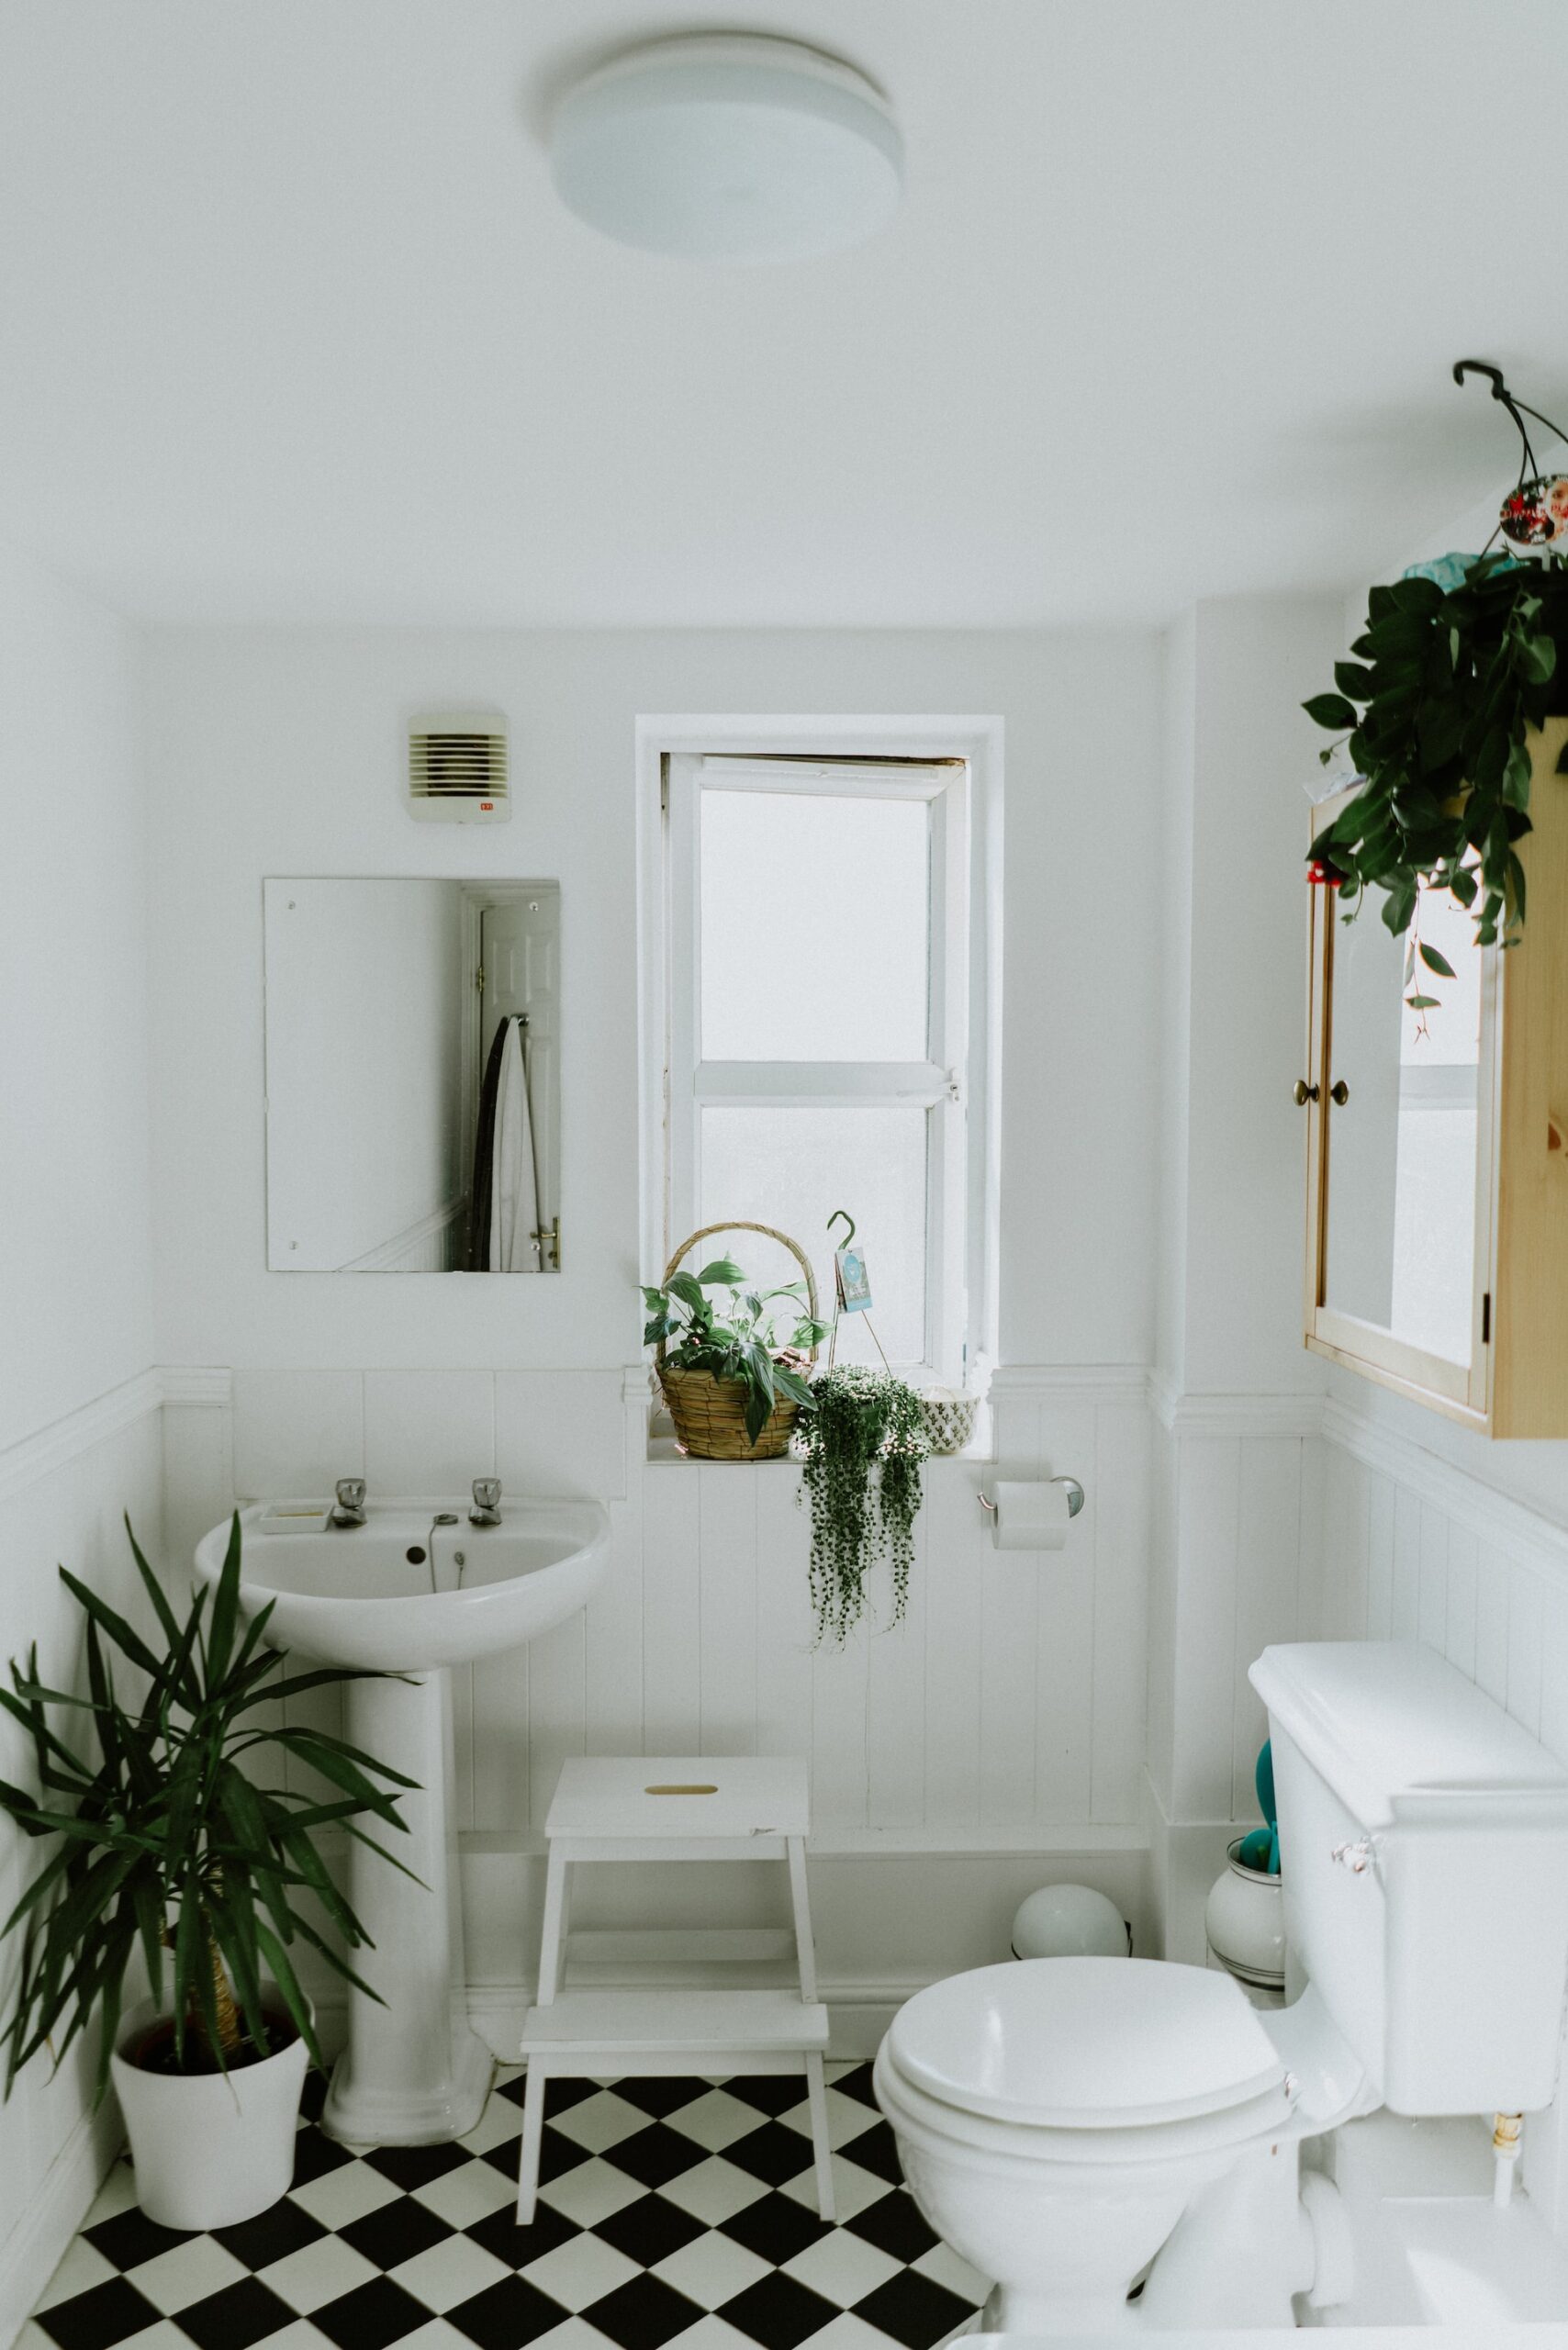 Ideas How to Decorate My Small Bathroom